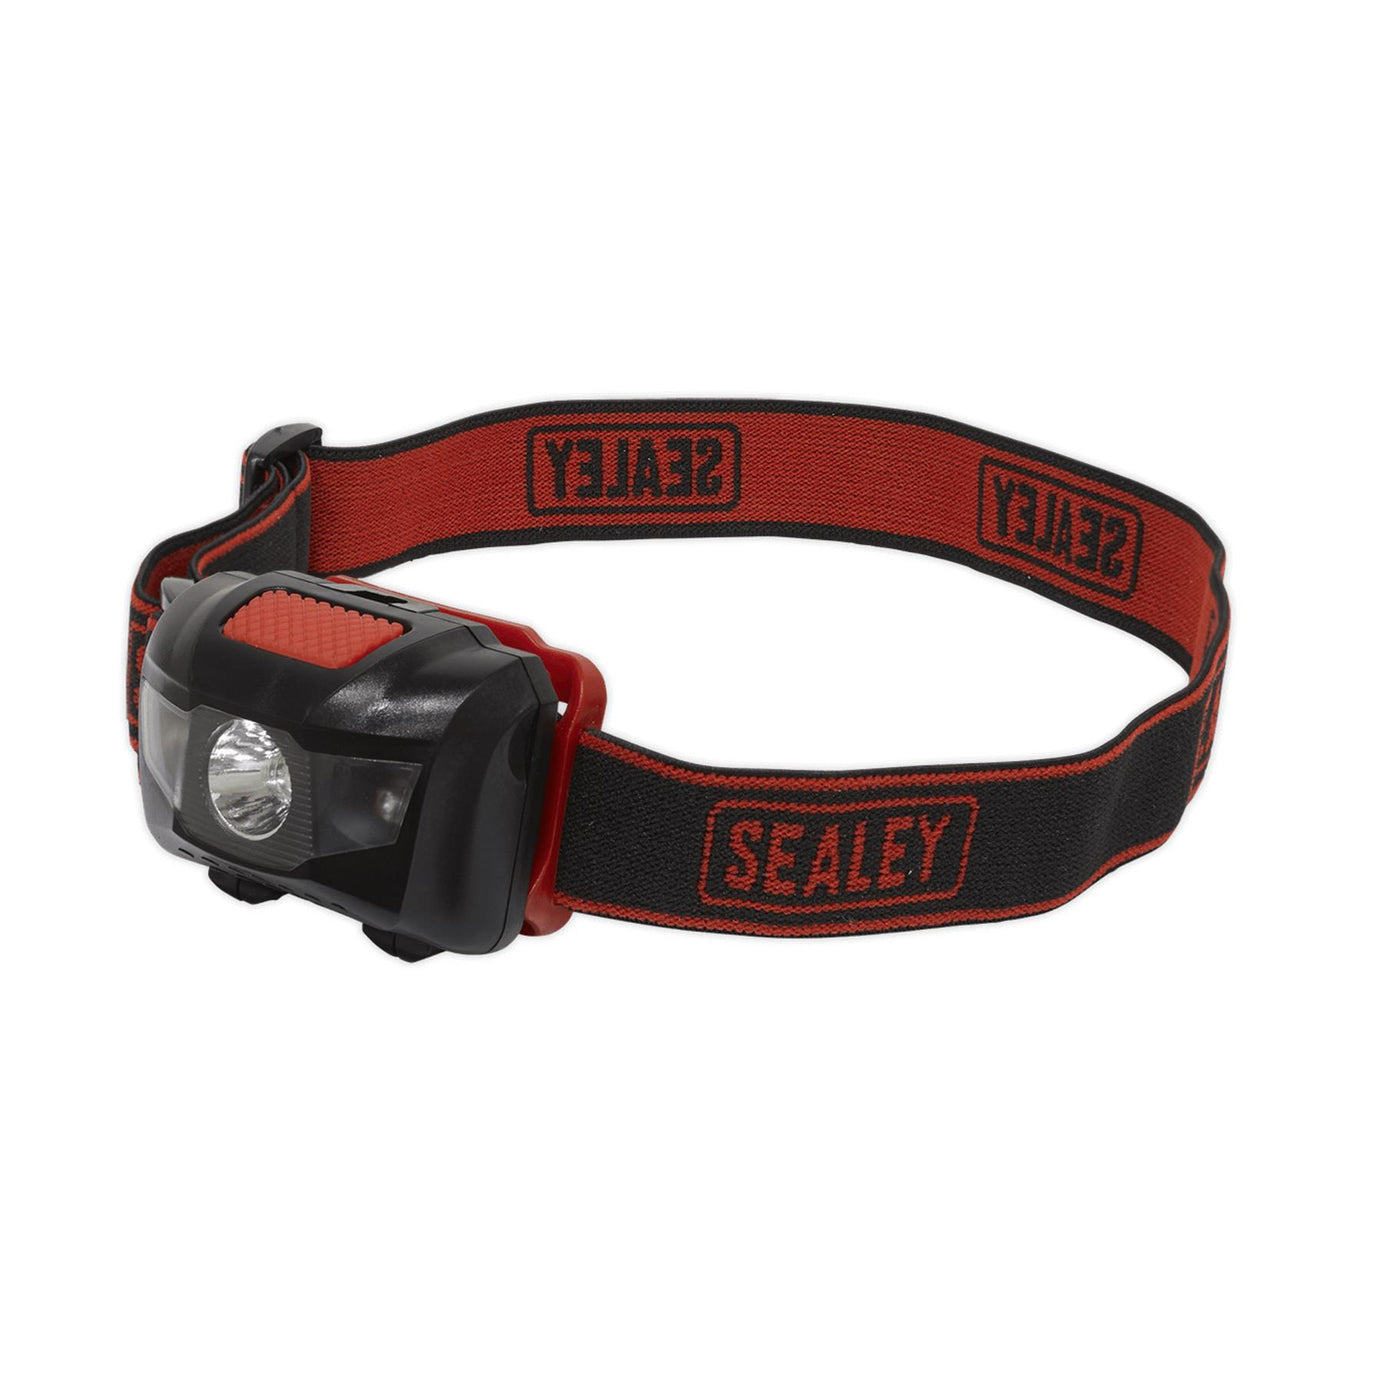 Sealey Head Torch 3W SMD & 2 Red LED 3 x AAA Cell